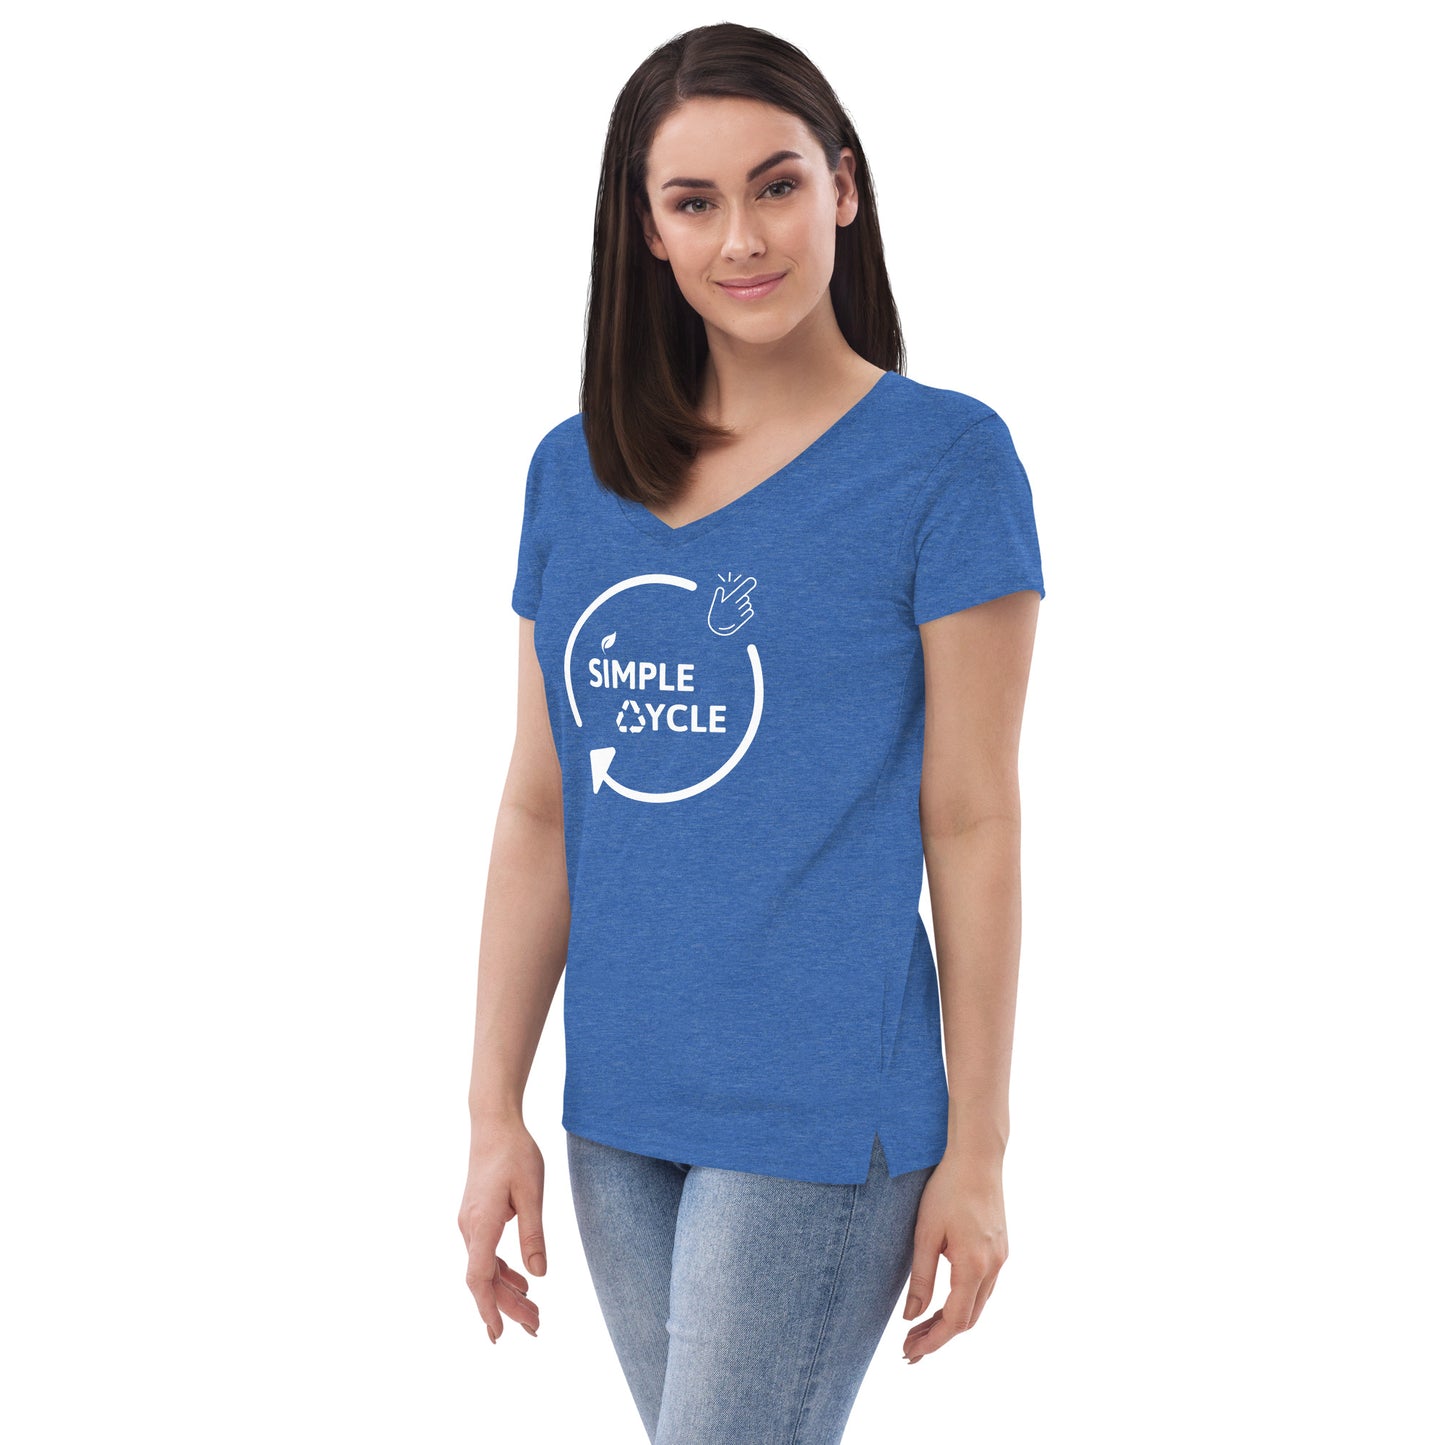 SimpleCycle Women’s Recycled V-Neck T-Shirt heather blue side left front